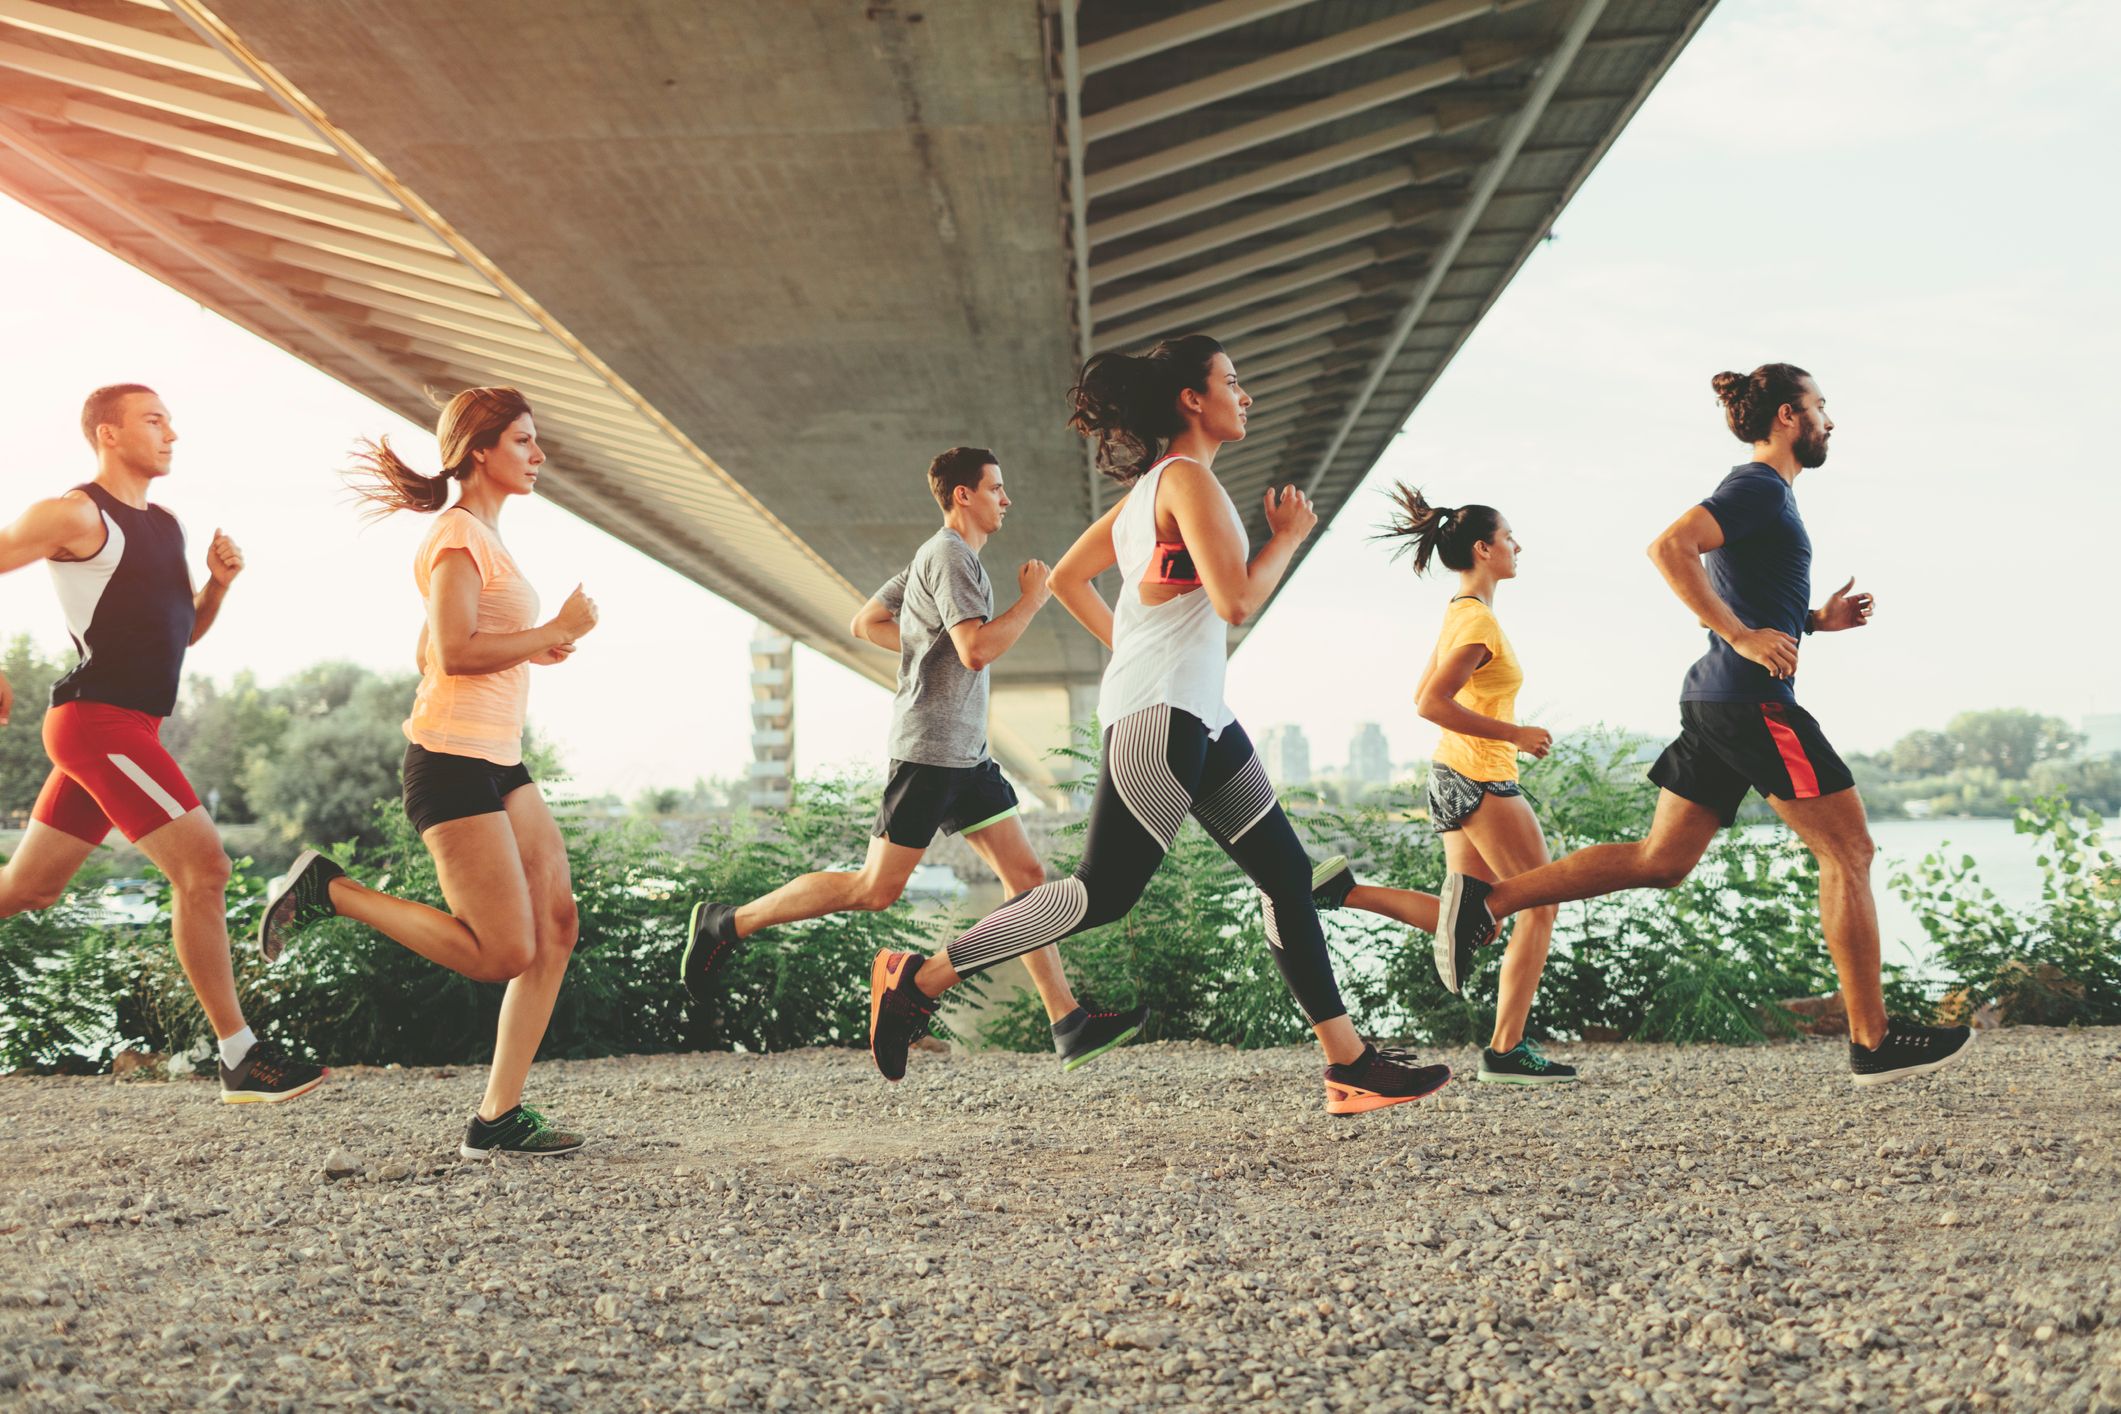 How To Lose Weight With Running: 11 Tips To Run For Weight Loss by